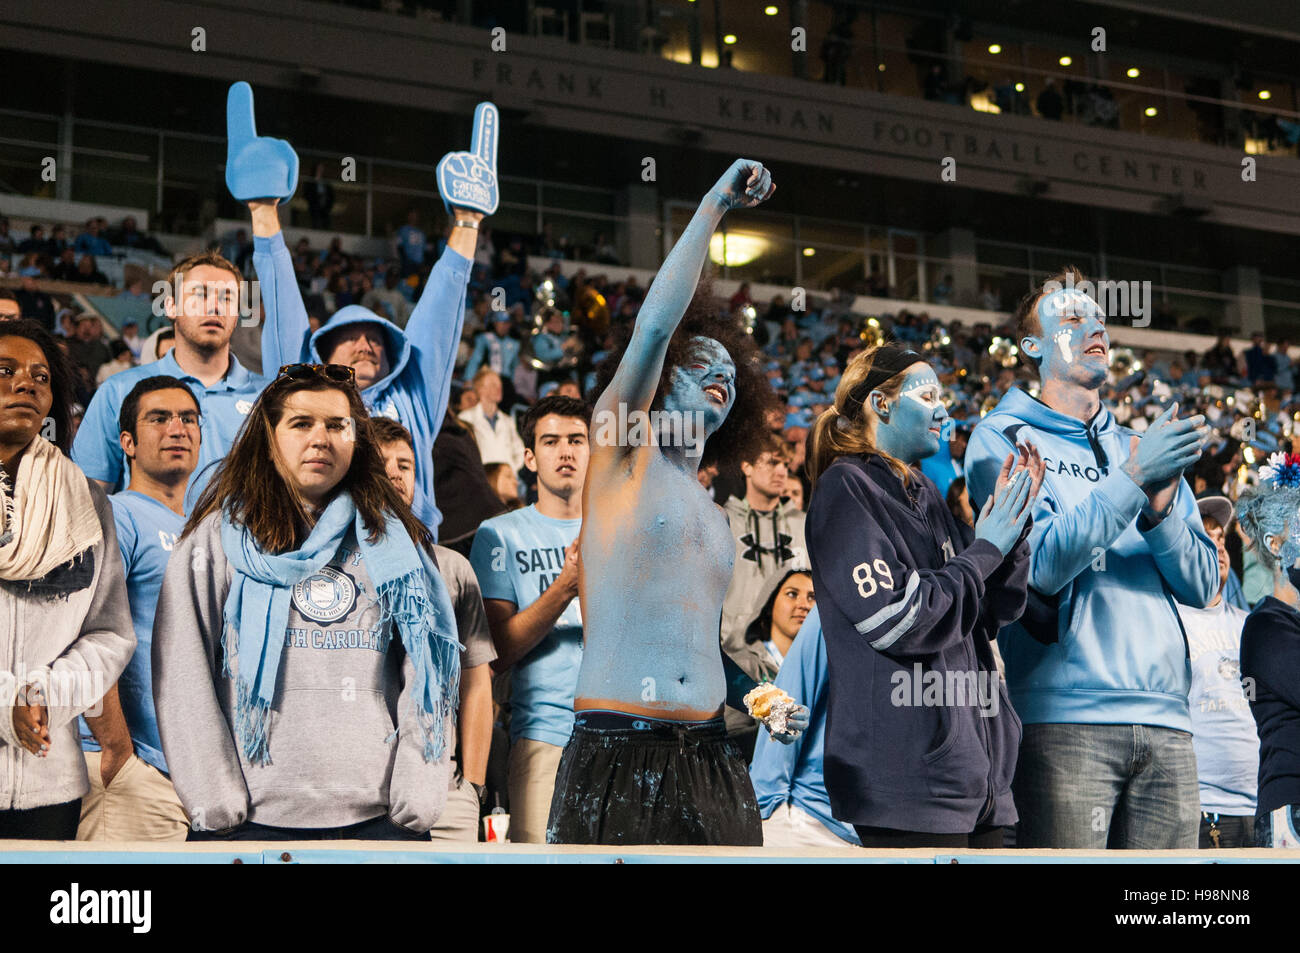 Chapel Hill, North Carolina, US. 19th Nov, 2016. Nov. 19, 2016 - Chapel Hill, N.C., USA - University of North Carolina Tar Heel students celebrate a touchdown during the second half of an NCAA football game between the North Carolina Tar Heels and The Citadel Bulldogs at Kenan Memorial Stadium in Chapel Hill, N.C. North Carolina won the game, 41-7. © Timothy L. Hale/ZUMA Wire/Alamy Live News Stock Photo